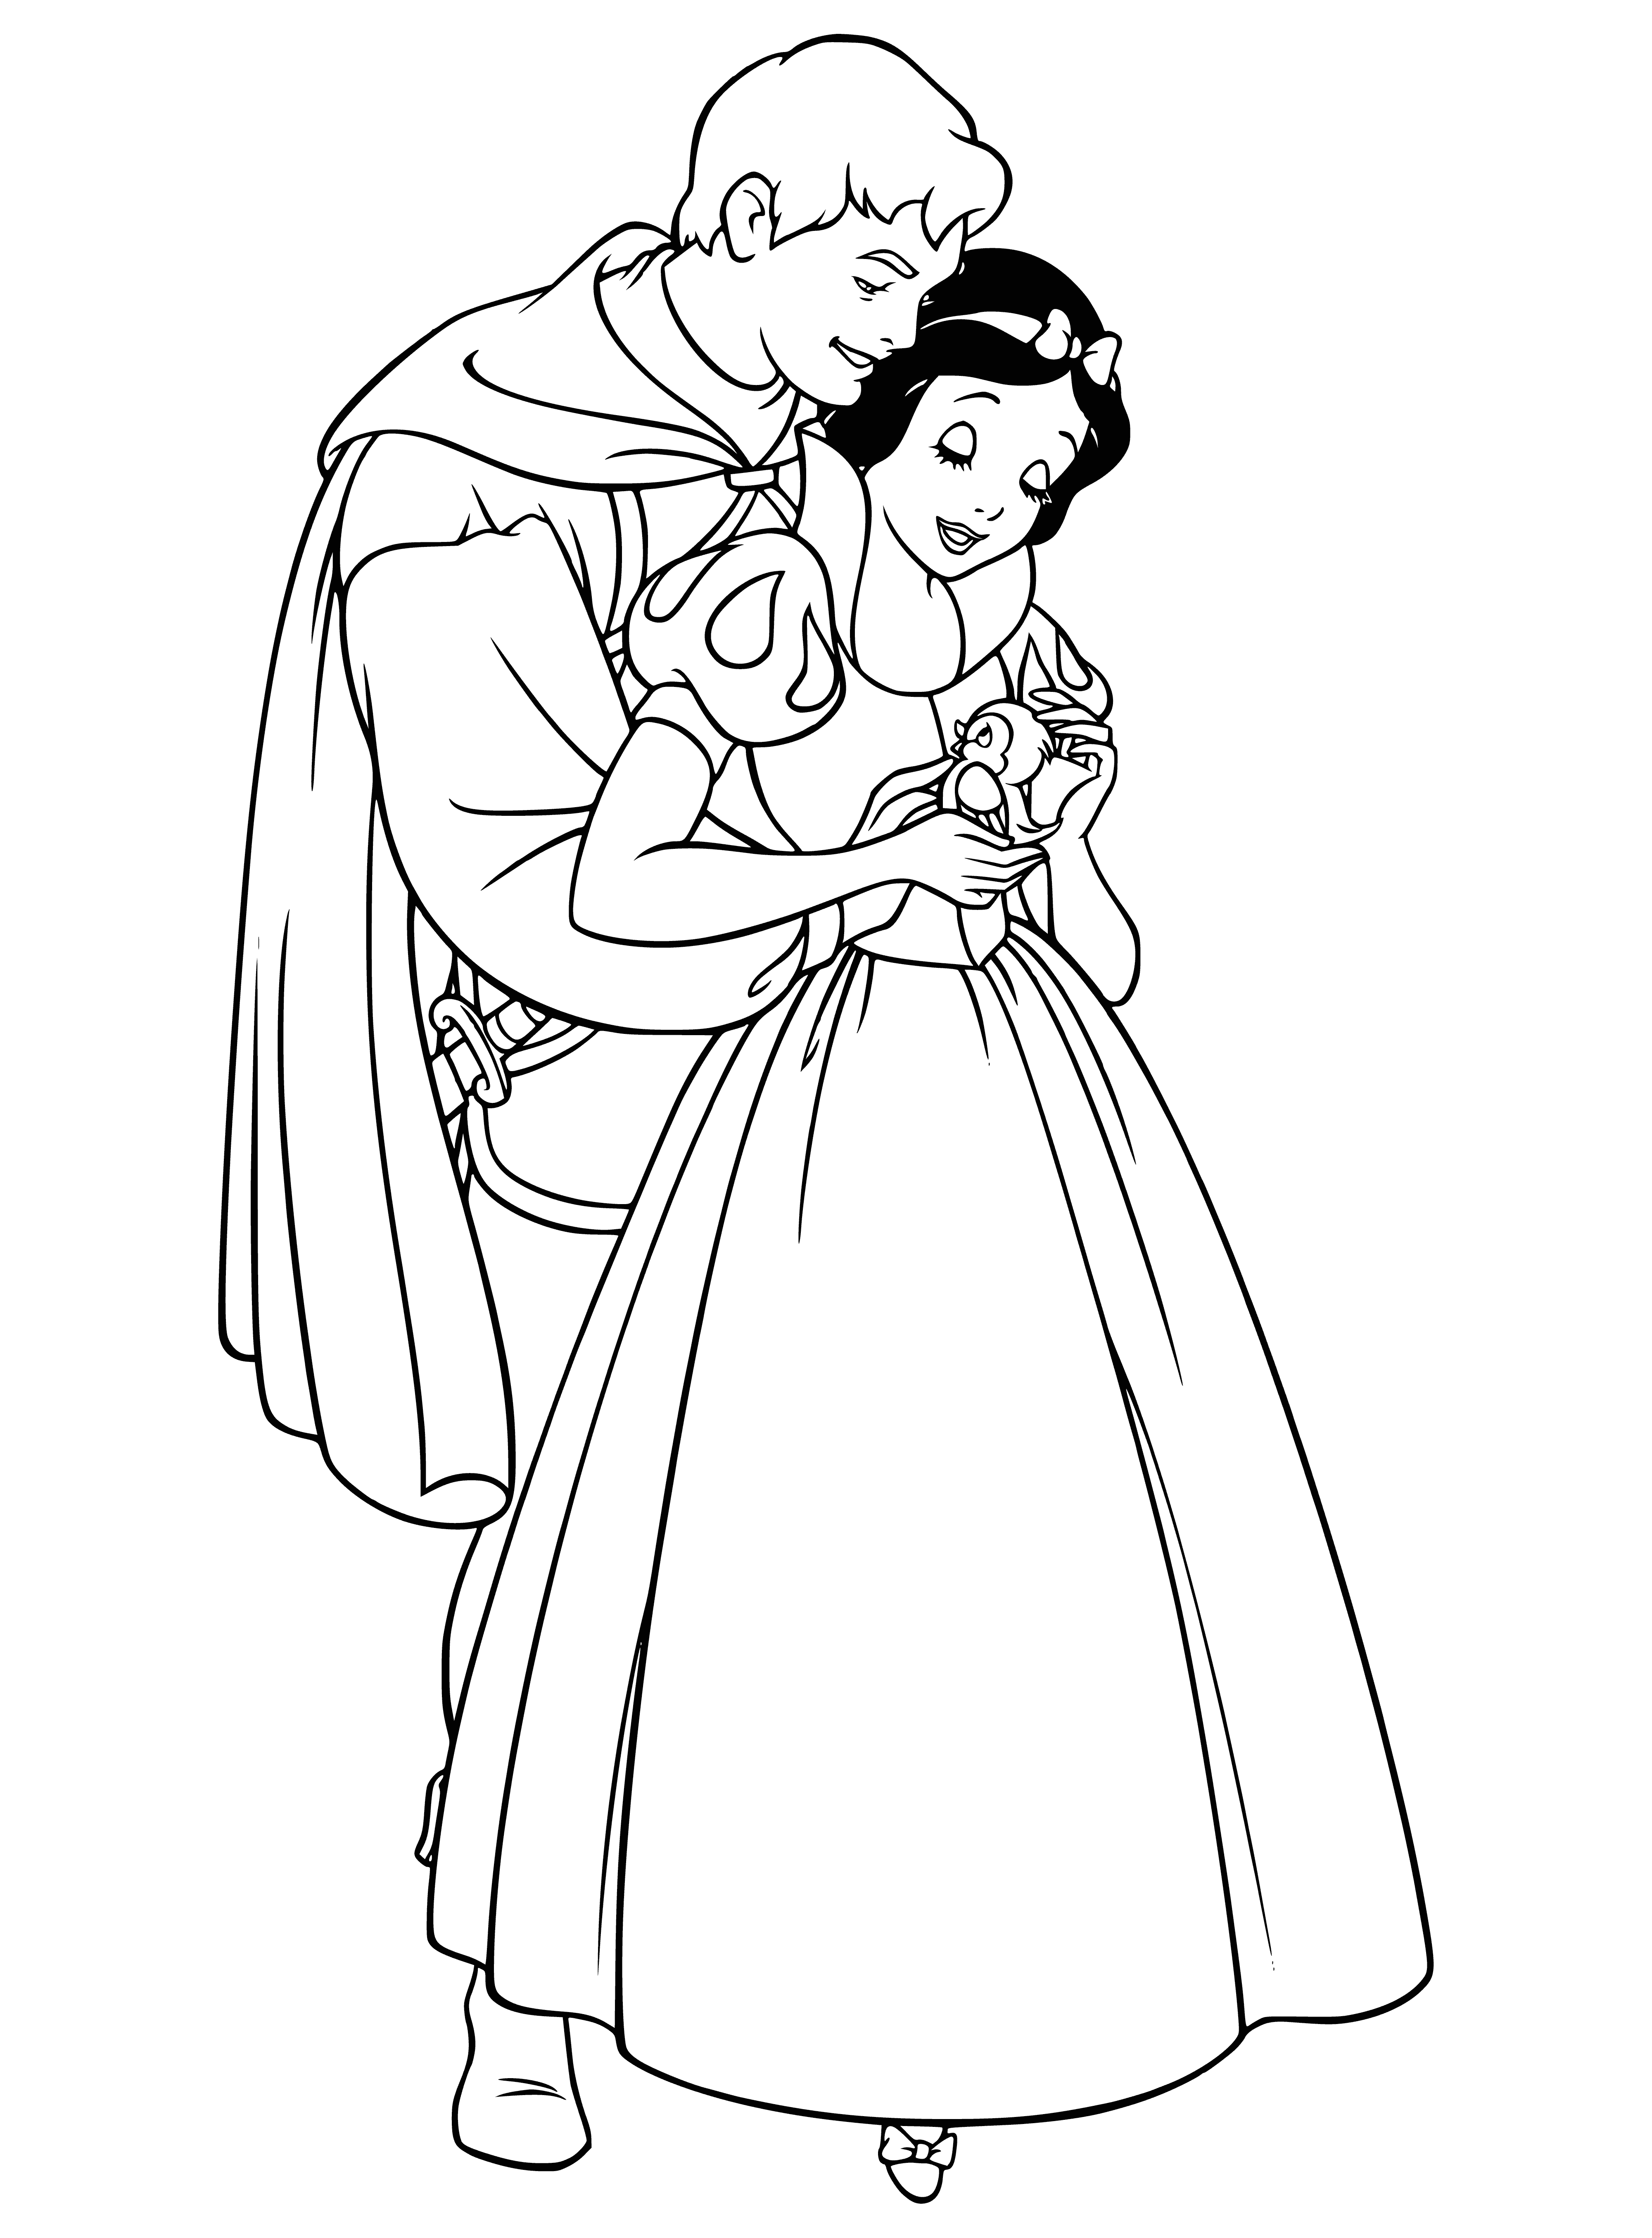 coloring page: A woman in white and a man in red stand, facing each other and smiling, surrounded by a forest with a castle on the horizon.